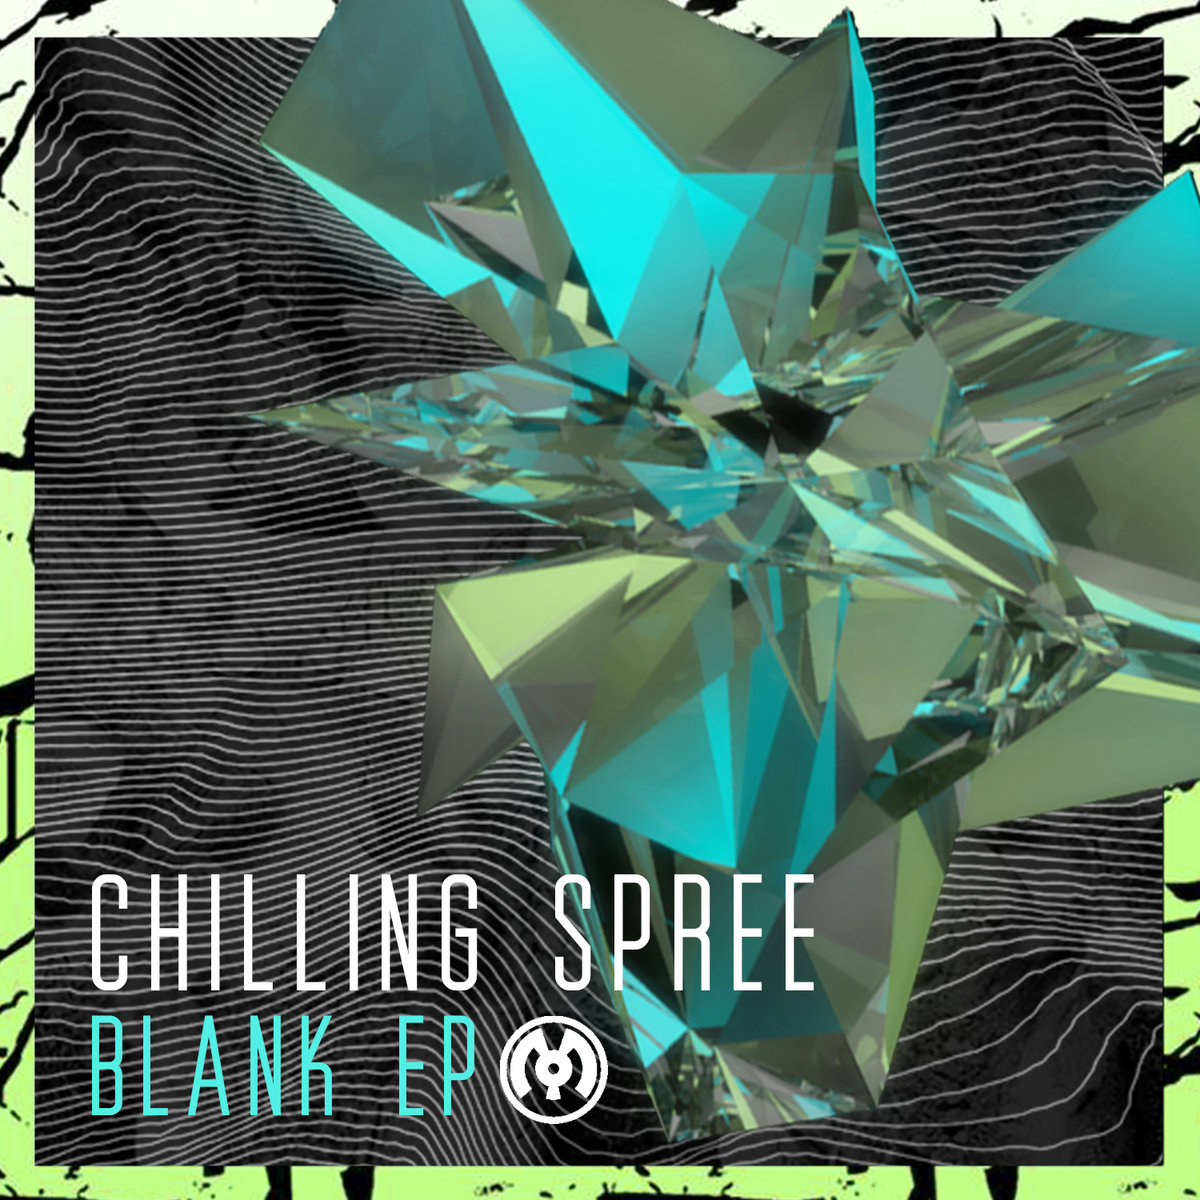 Chilling Spree - Boomerang @ 'The Blank EP' album (electronic, dubstep)